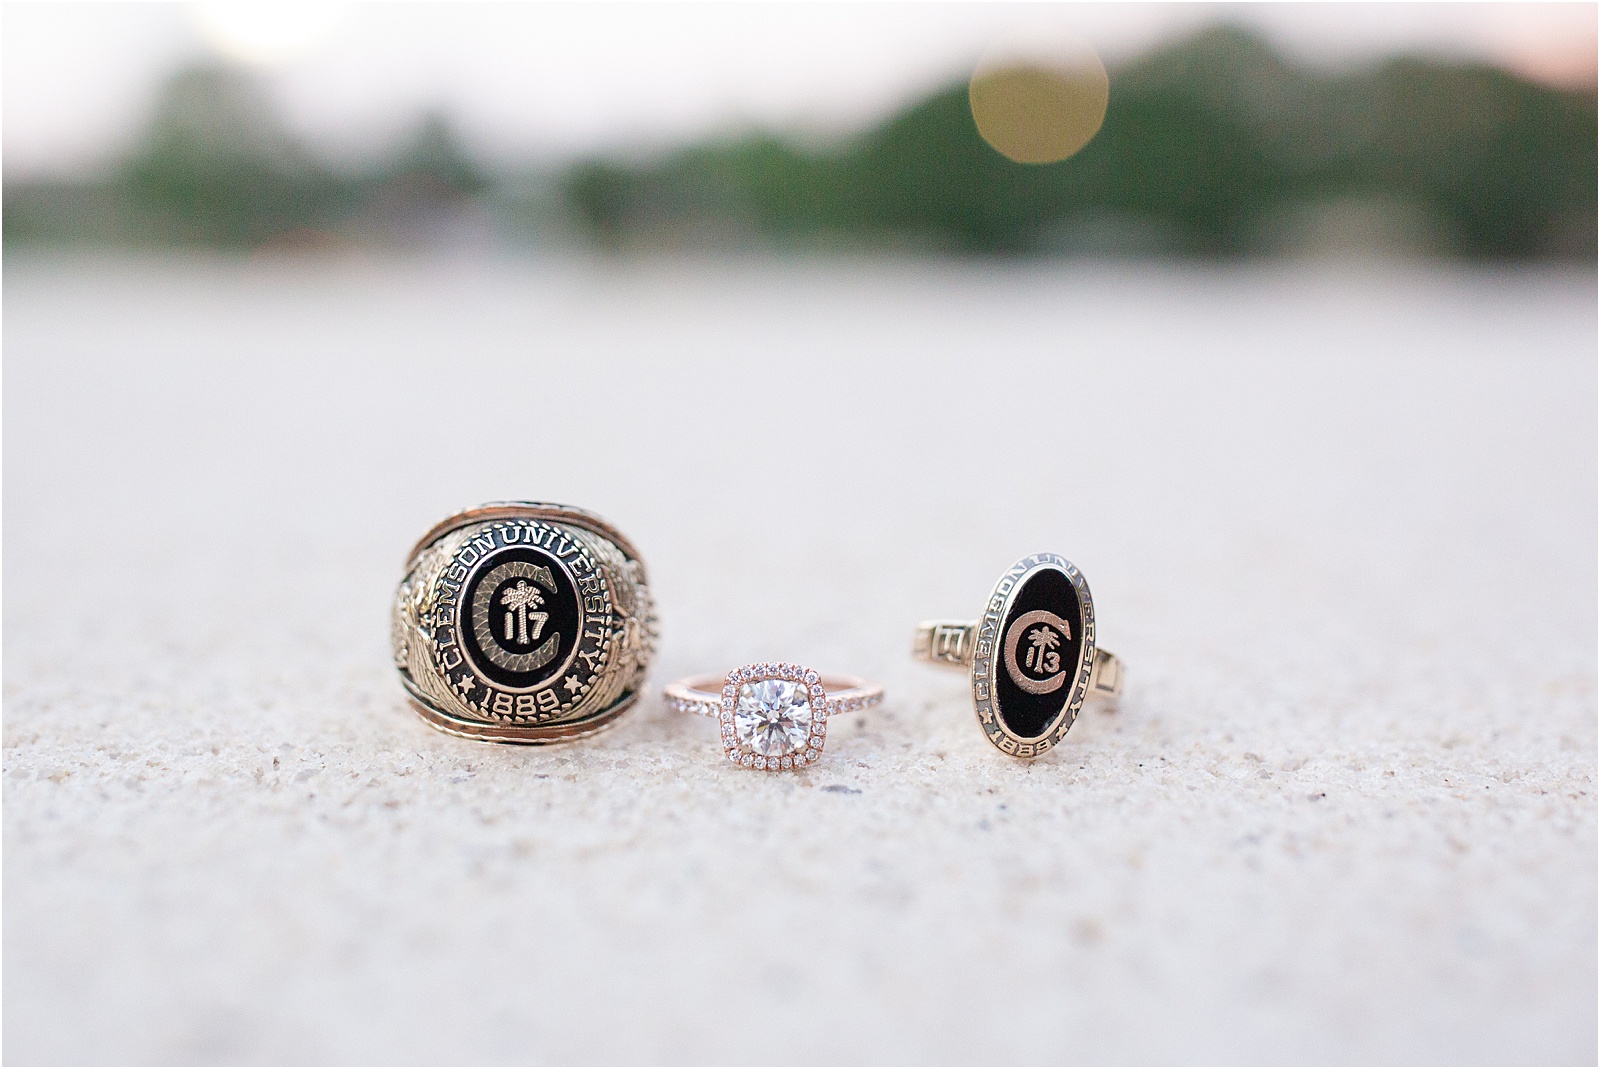 Wedding rings with Clemson graduation rings